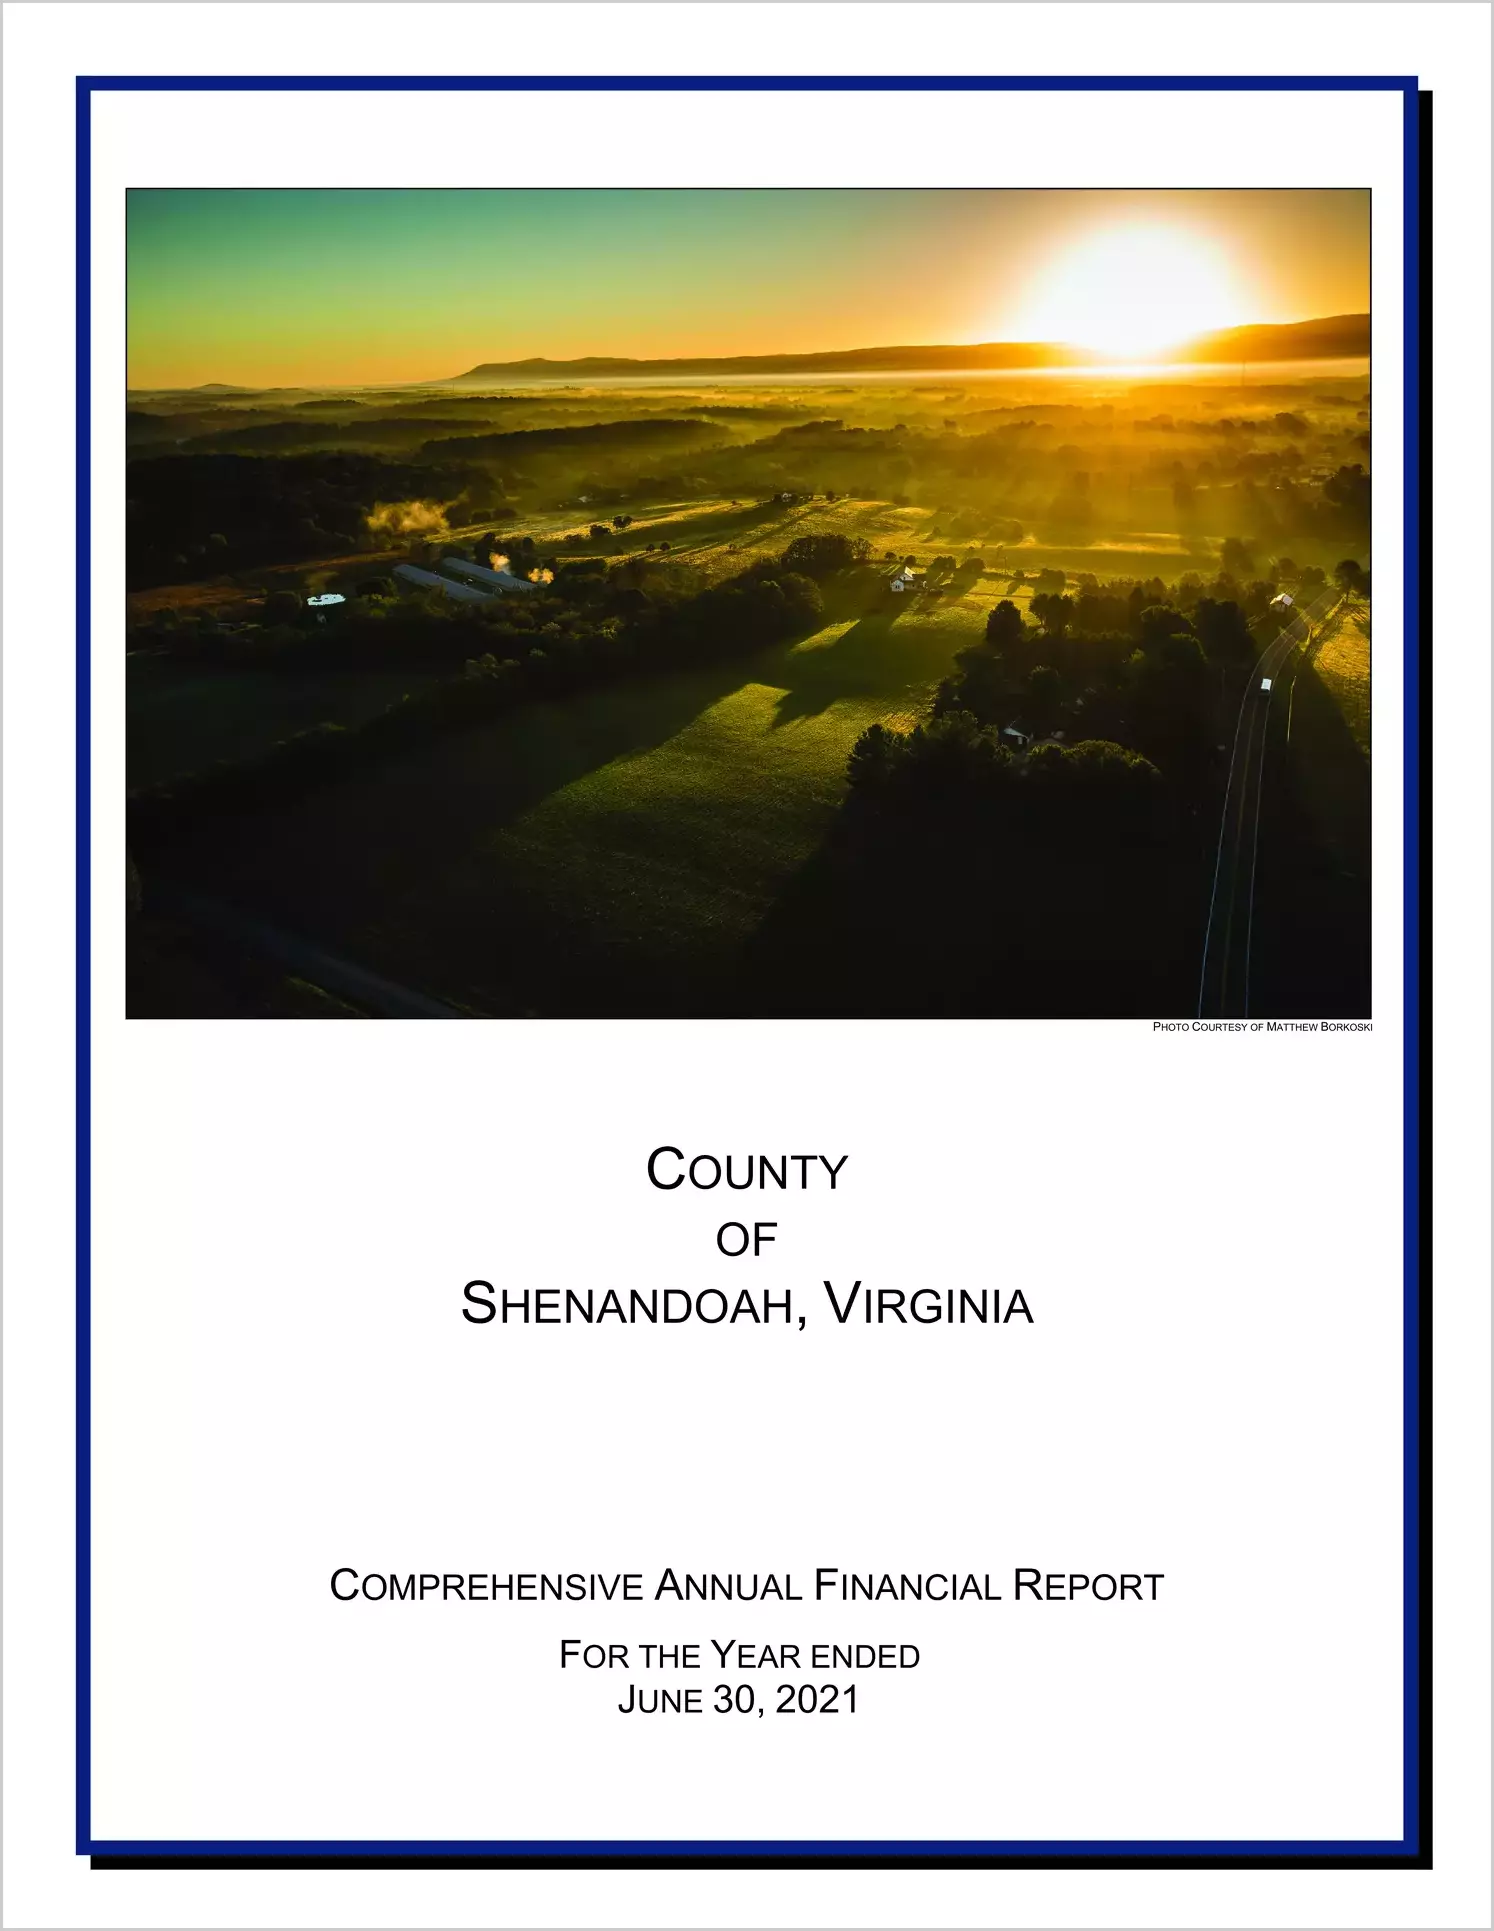 2021 Annual Financial Report for County of Shenandoah